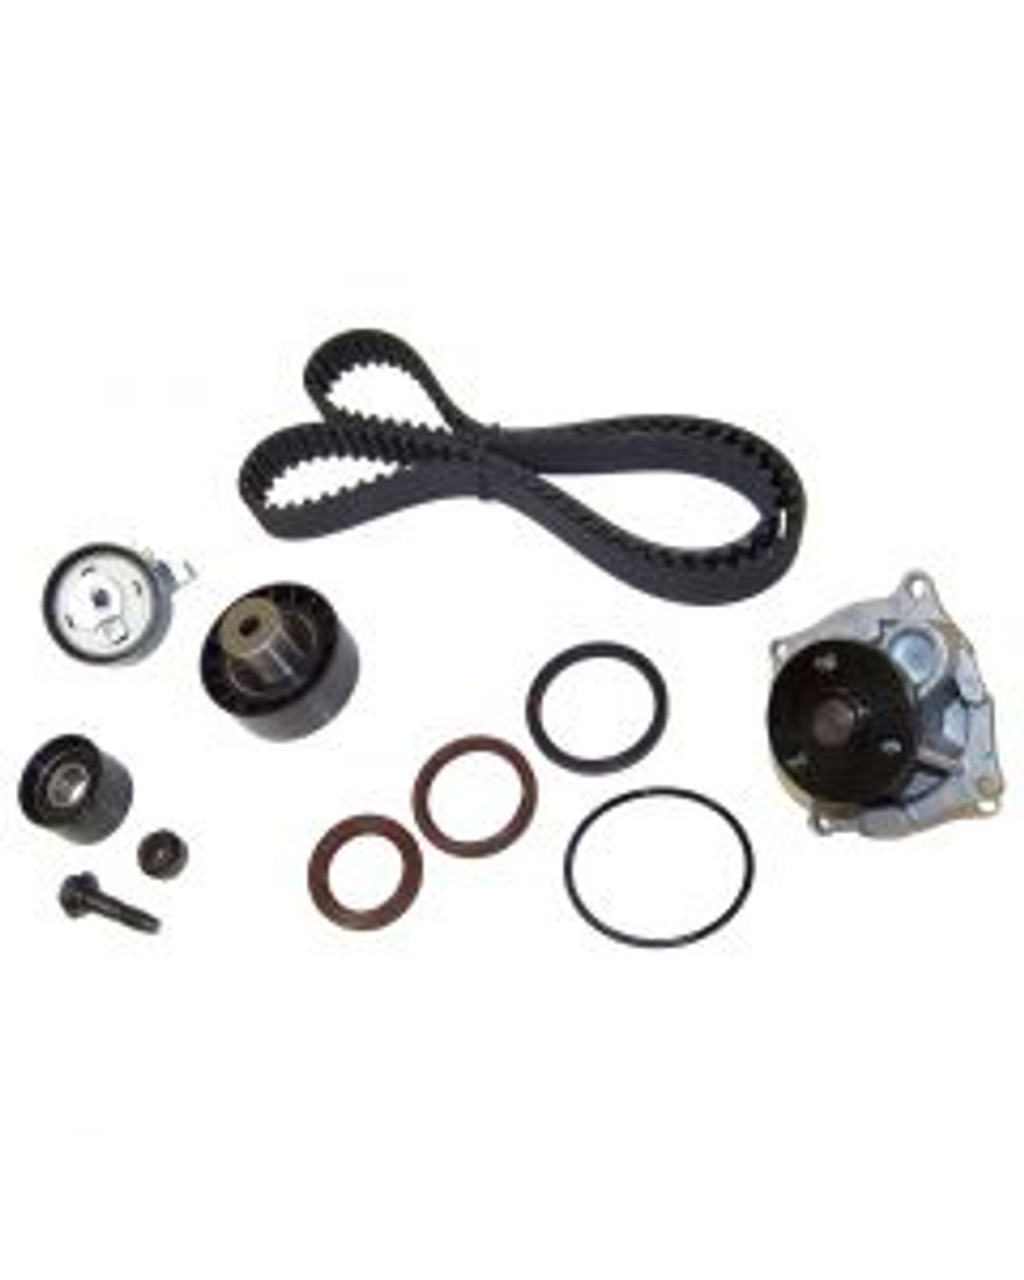 2000 Ford Focus 2.0L Timing Belt Kit with Water Pump TBK418BWP.E5